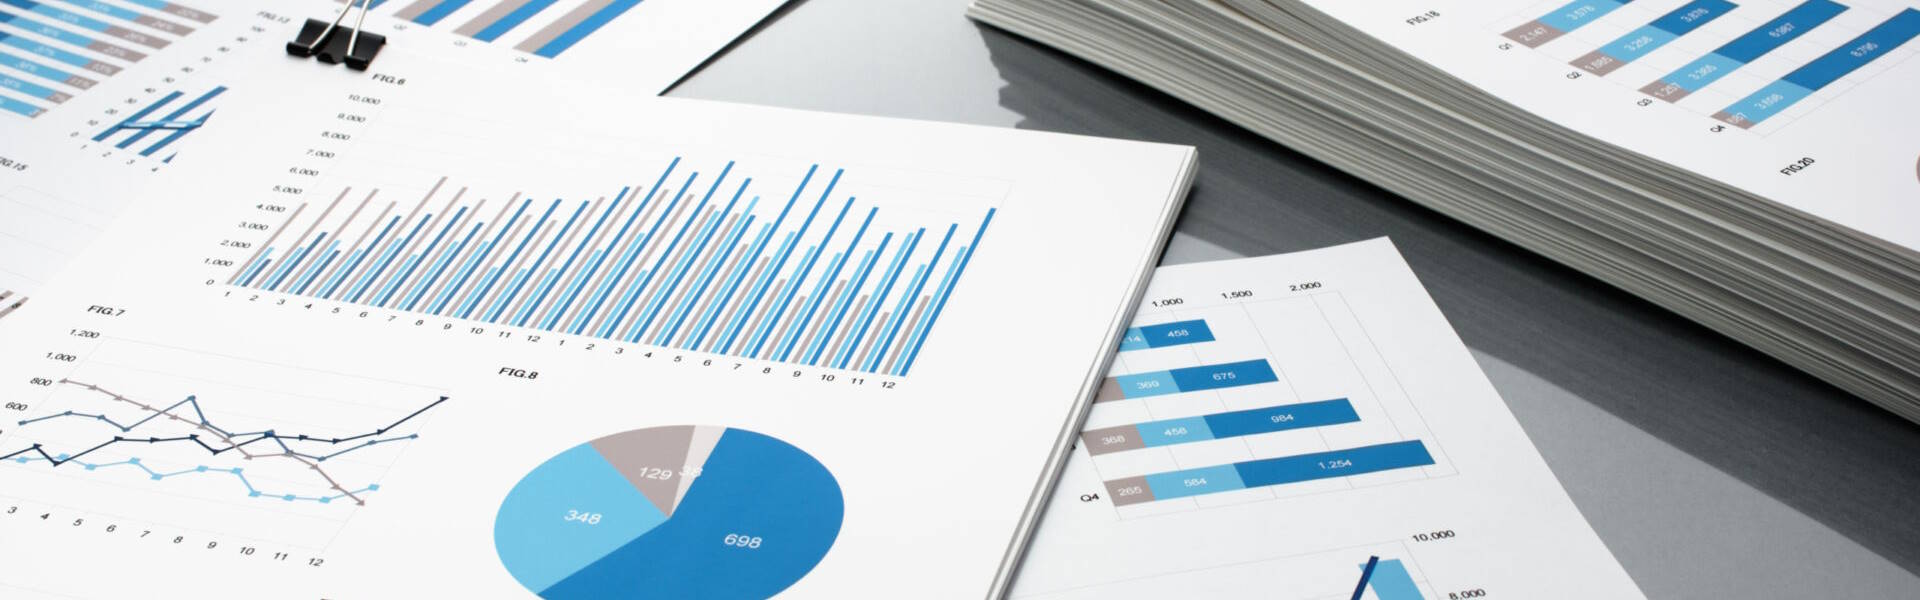 Investment documents on desk charts and graphs